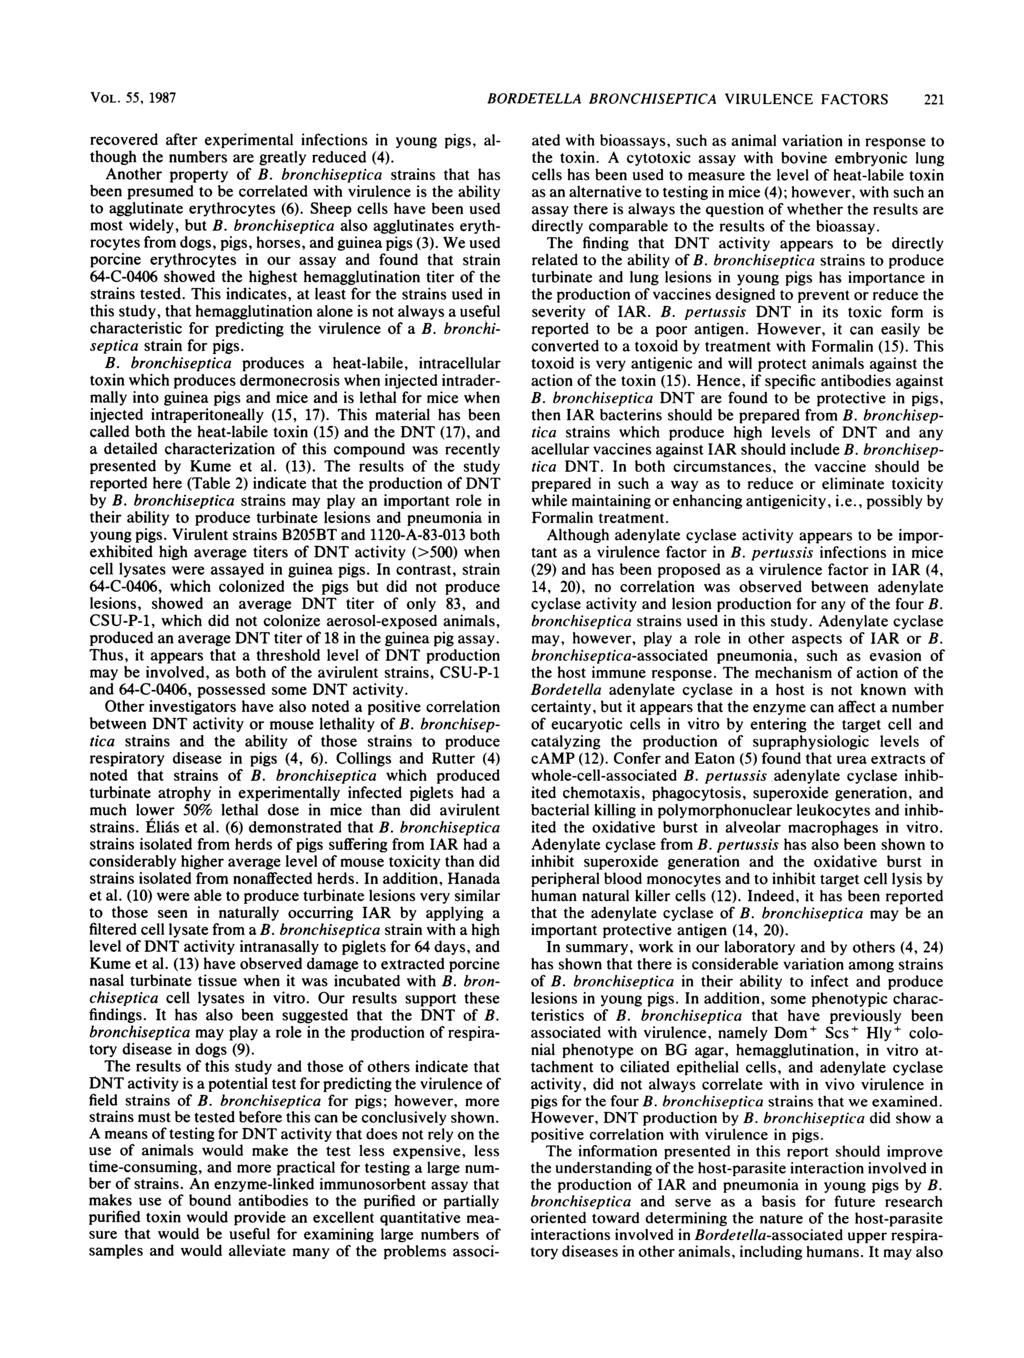 VOL. 55, 1987 BORDETELLA BRONCHISEPTICA VIRULENCE FACTORS 221 recovered after experimental infections in young pigs, although the numbers are greatly reduced (4). Another property of B.